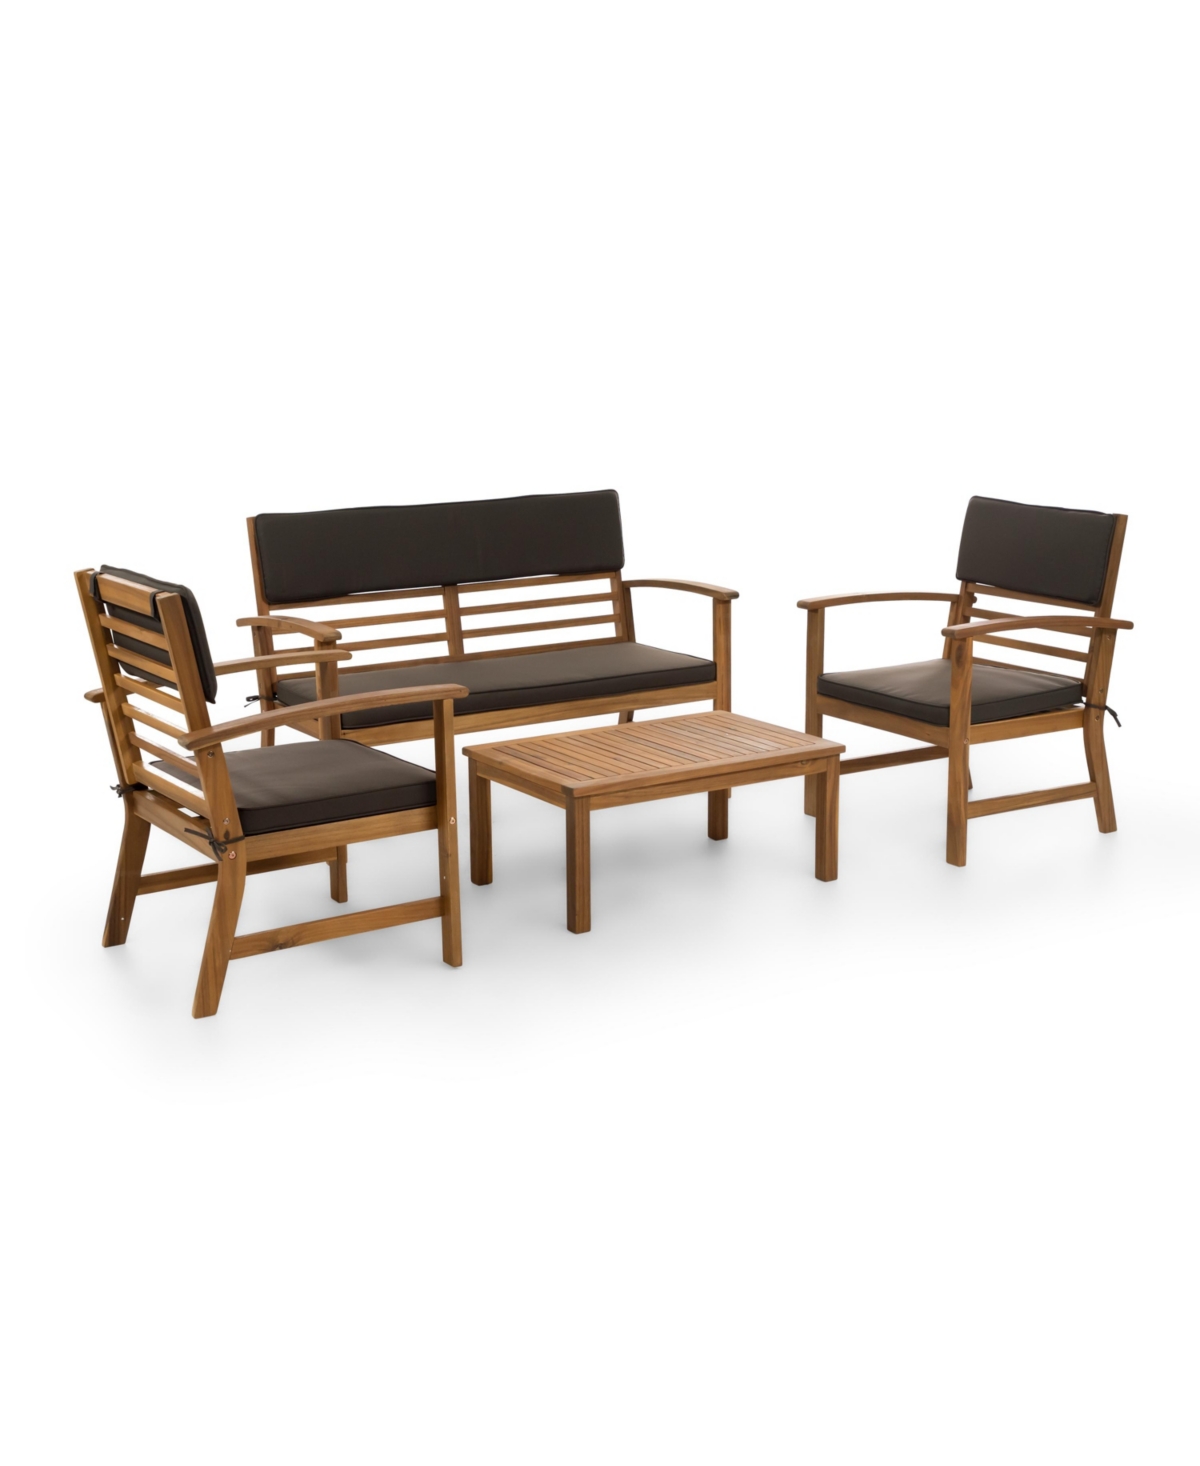 Furniture Of America 4 Piece Acacia Patio Bench Table Set With Cushions In Drown